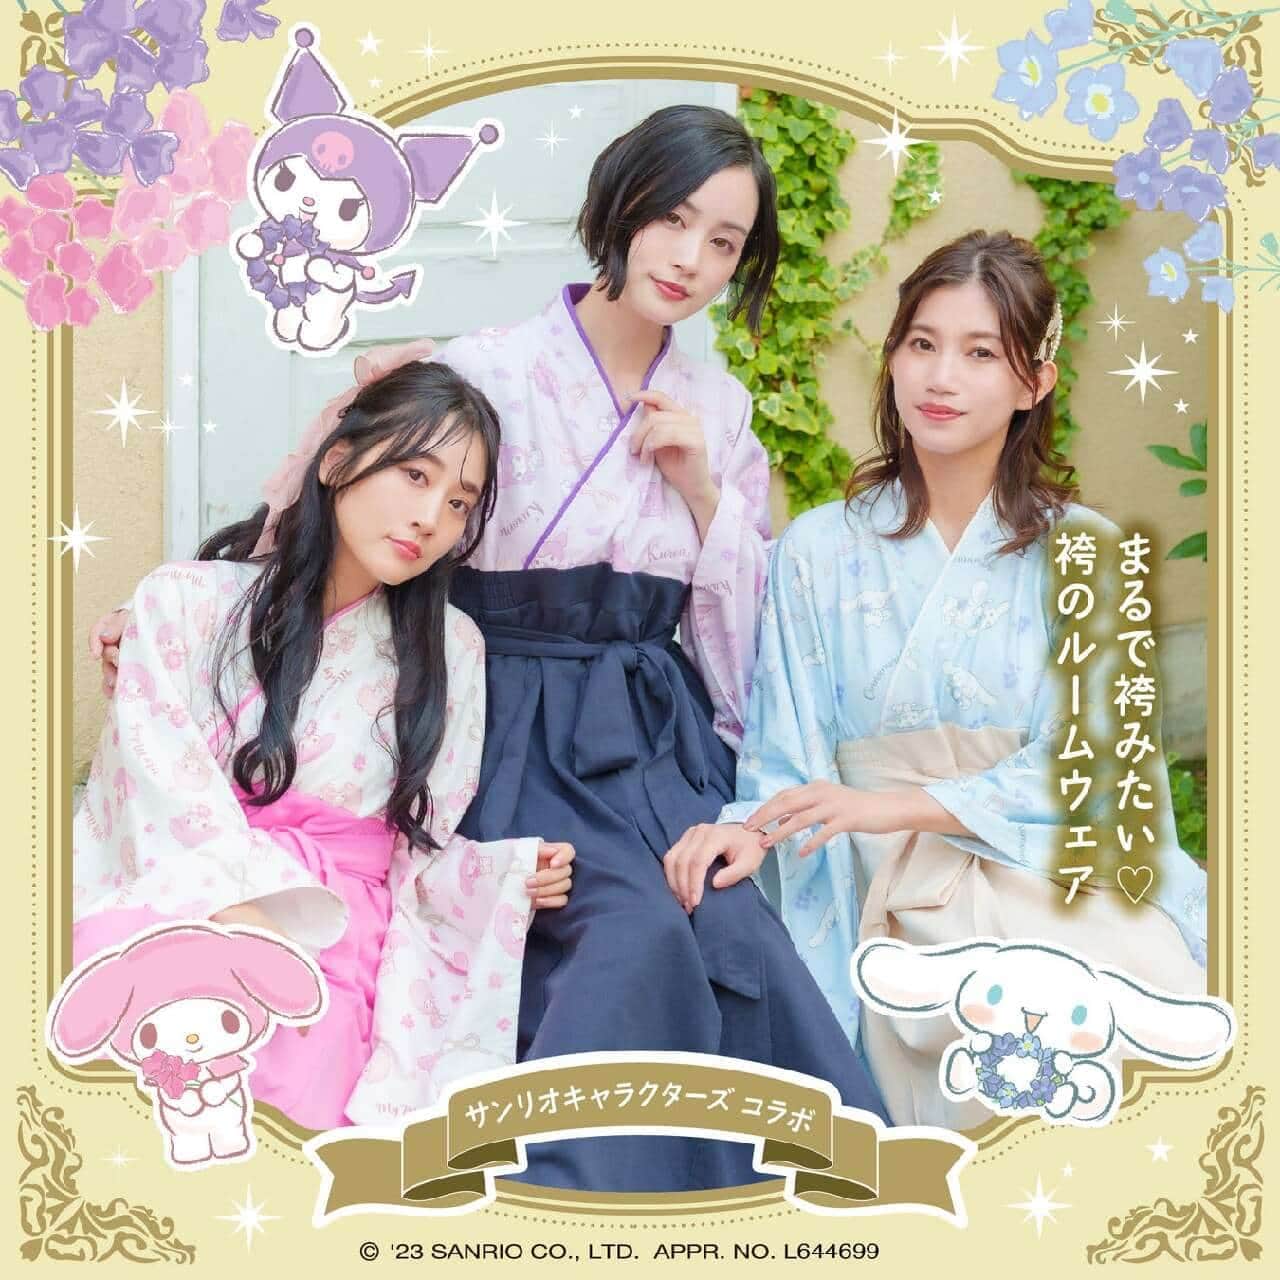 Village Vanguard Online Store will launch "Yuru Hakama" on March 18th, a new item that lets you enjoy Taisho Romanticism in a modern way with Sanrio characters. Image 1